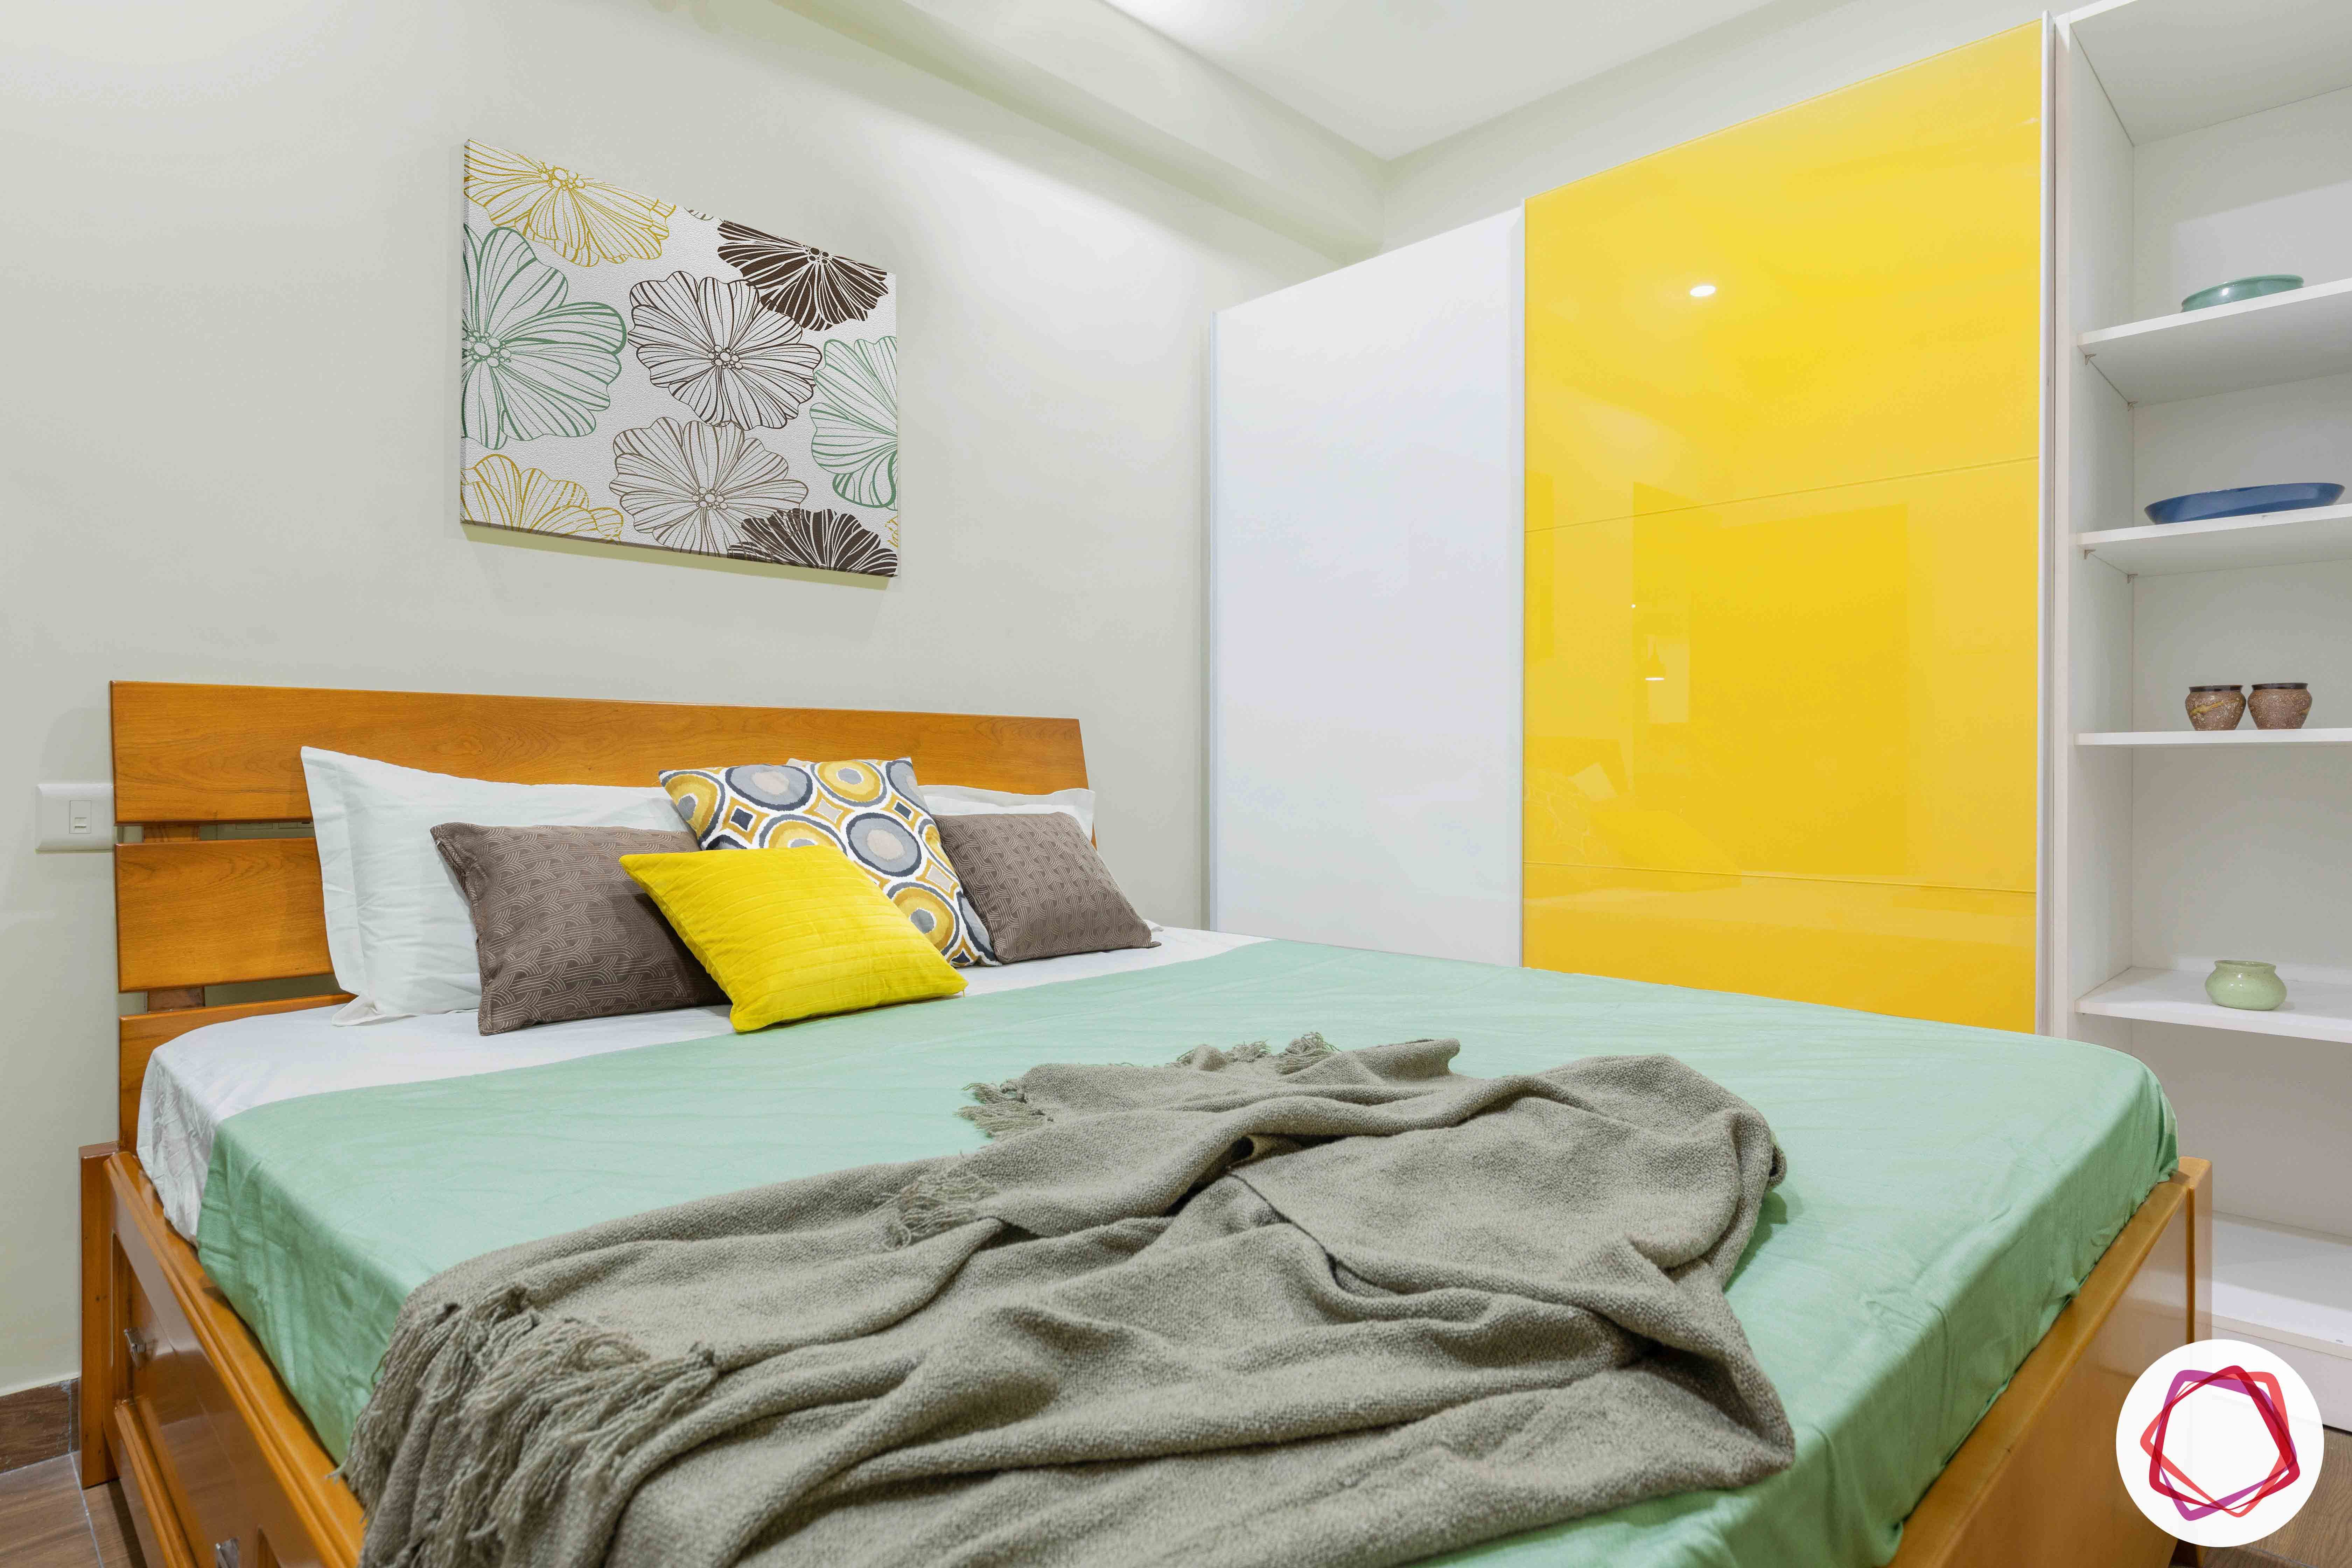 yellow and white wardrobe-yellow blinds-wooden bed
